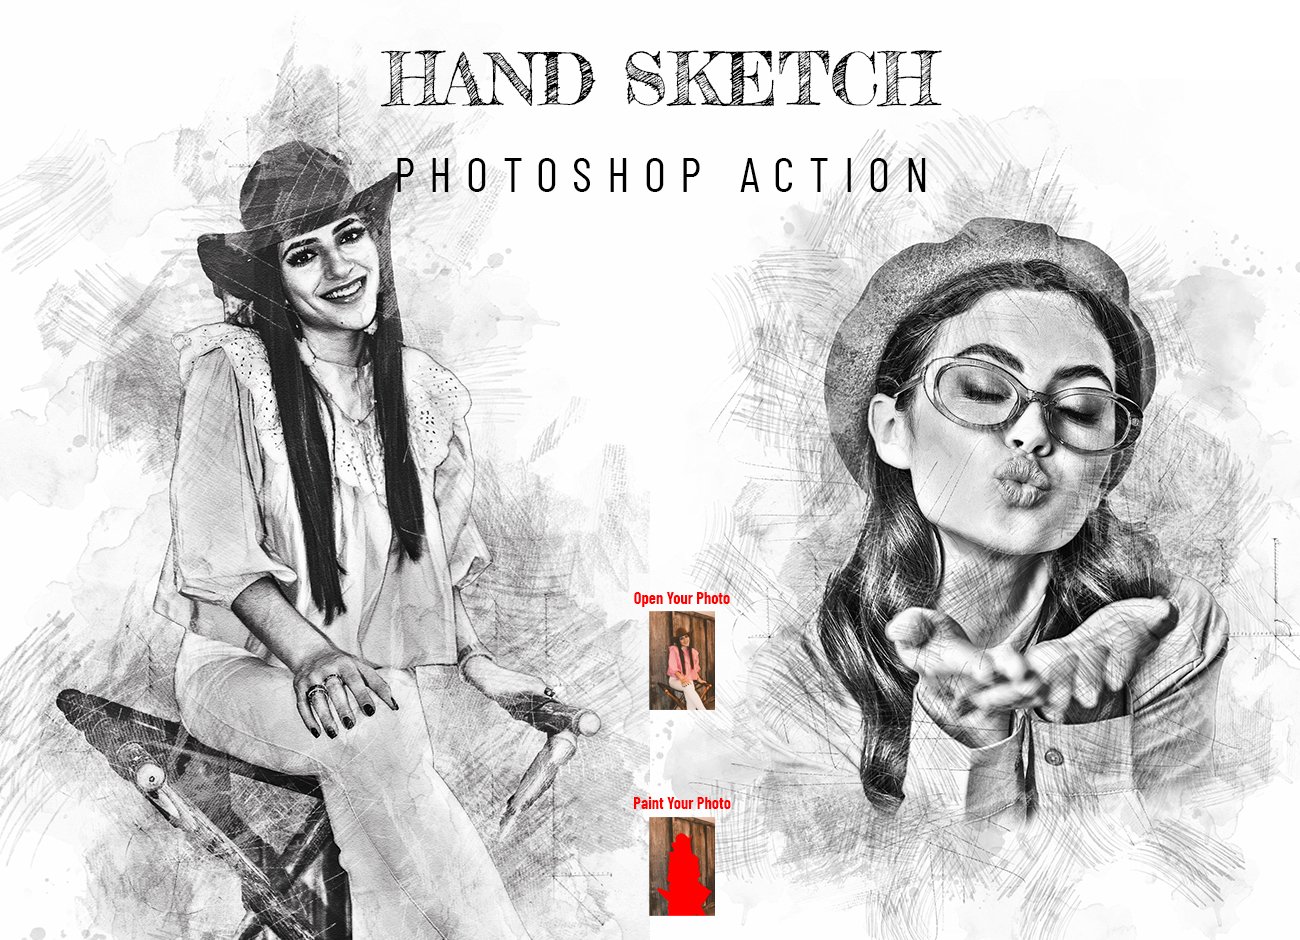 Hand Sketch Photoshop Actioncover image.